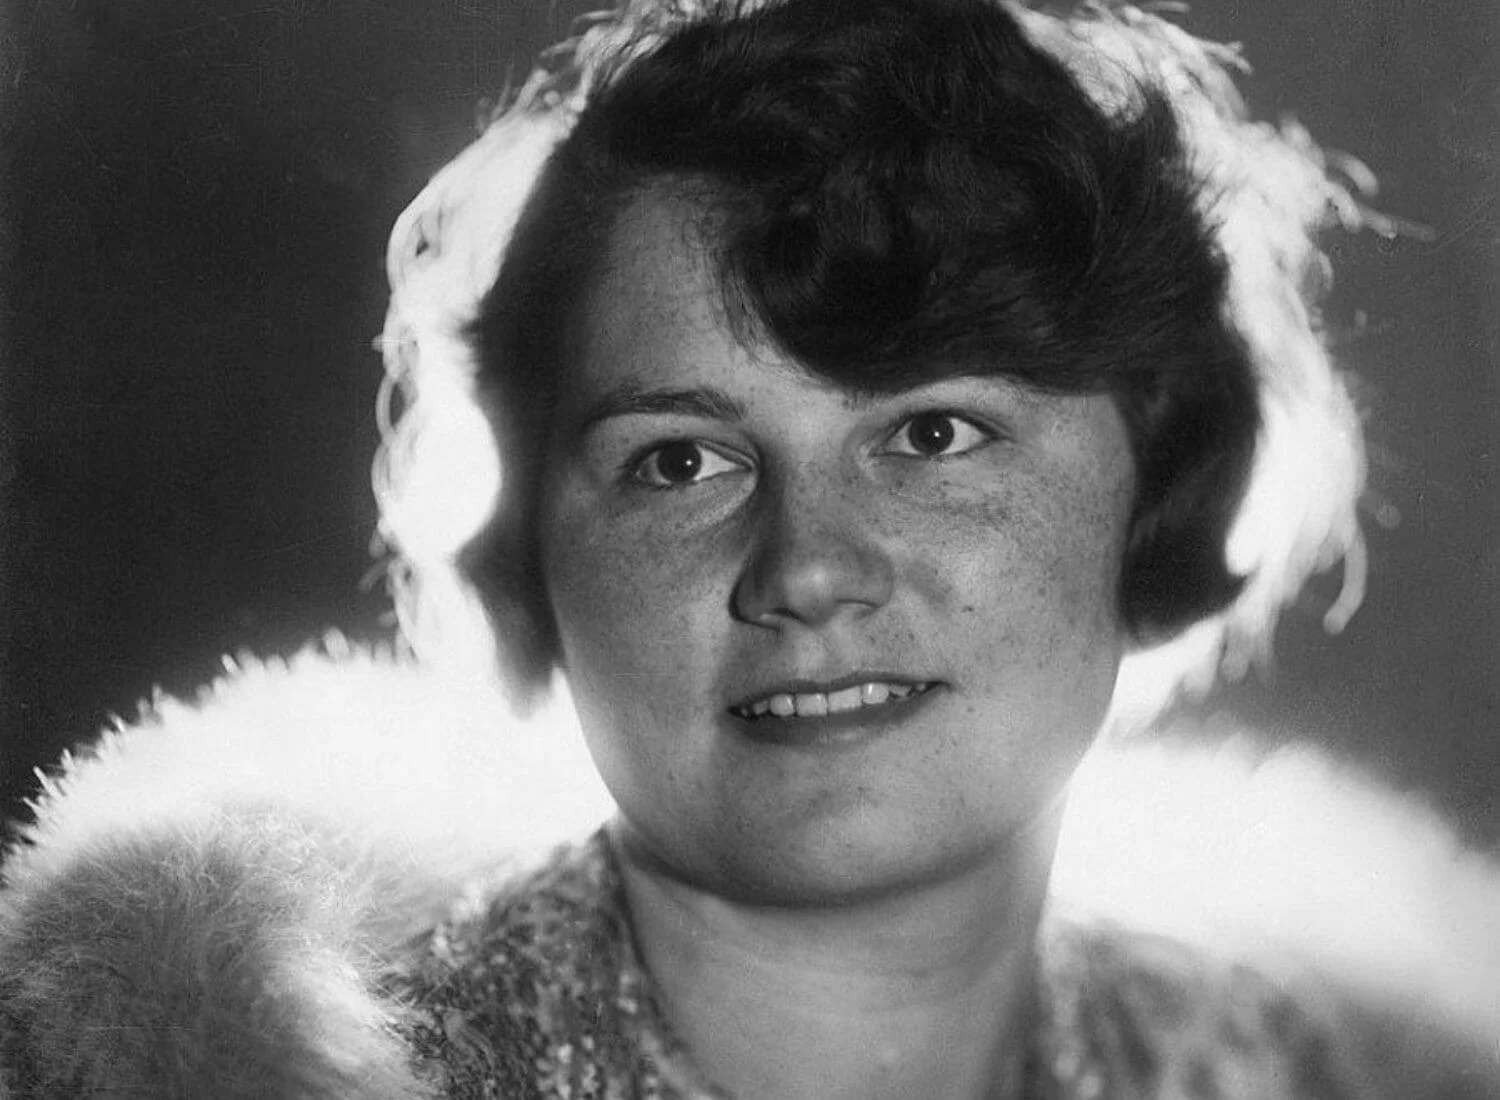 The Mysterious Death Of Geli Raubal: Hitler's Niece And Lover